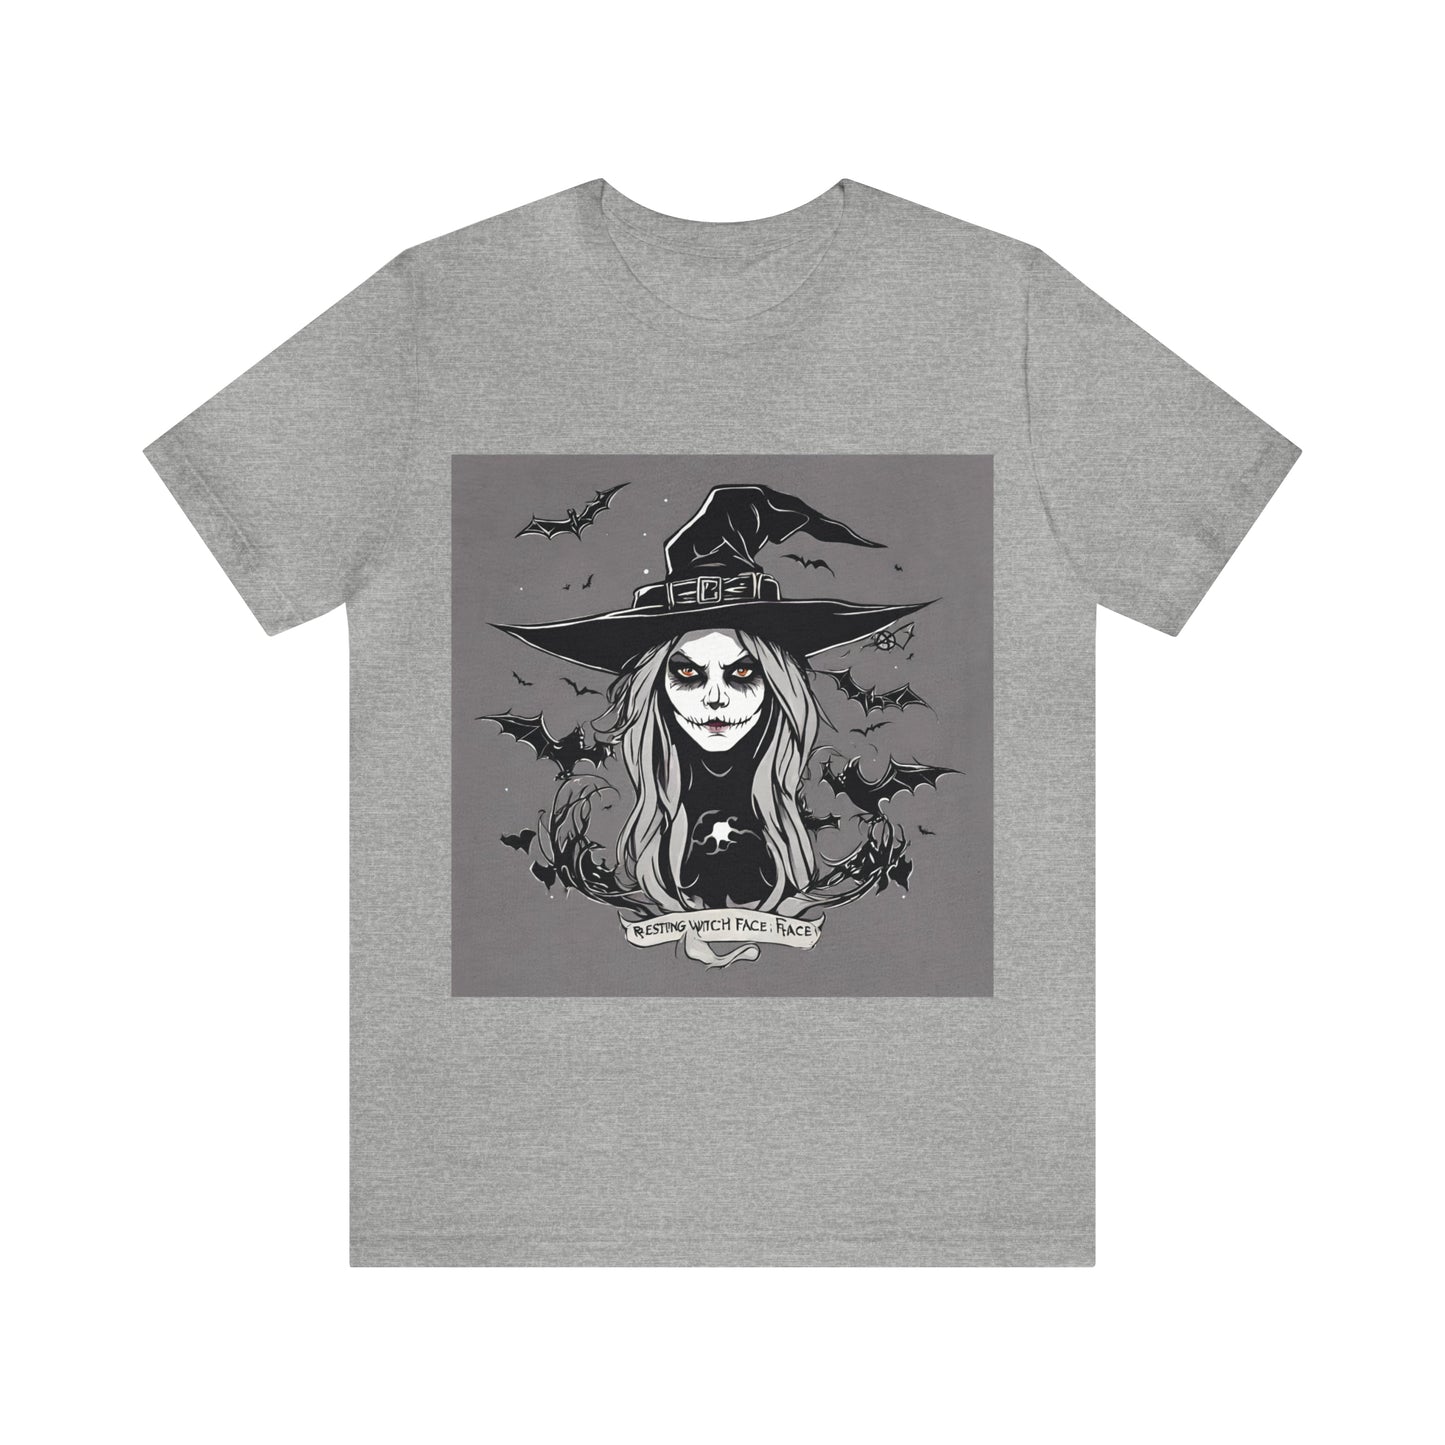 Athletic Heather T-Shirt Tshirt Design Halloween Gift for Friend and Family Short Sleeved Shirt Petrova Designs